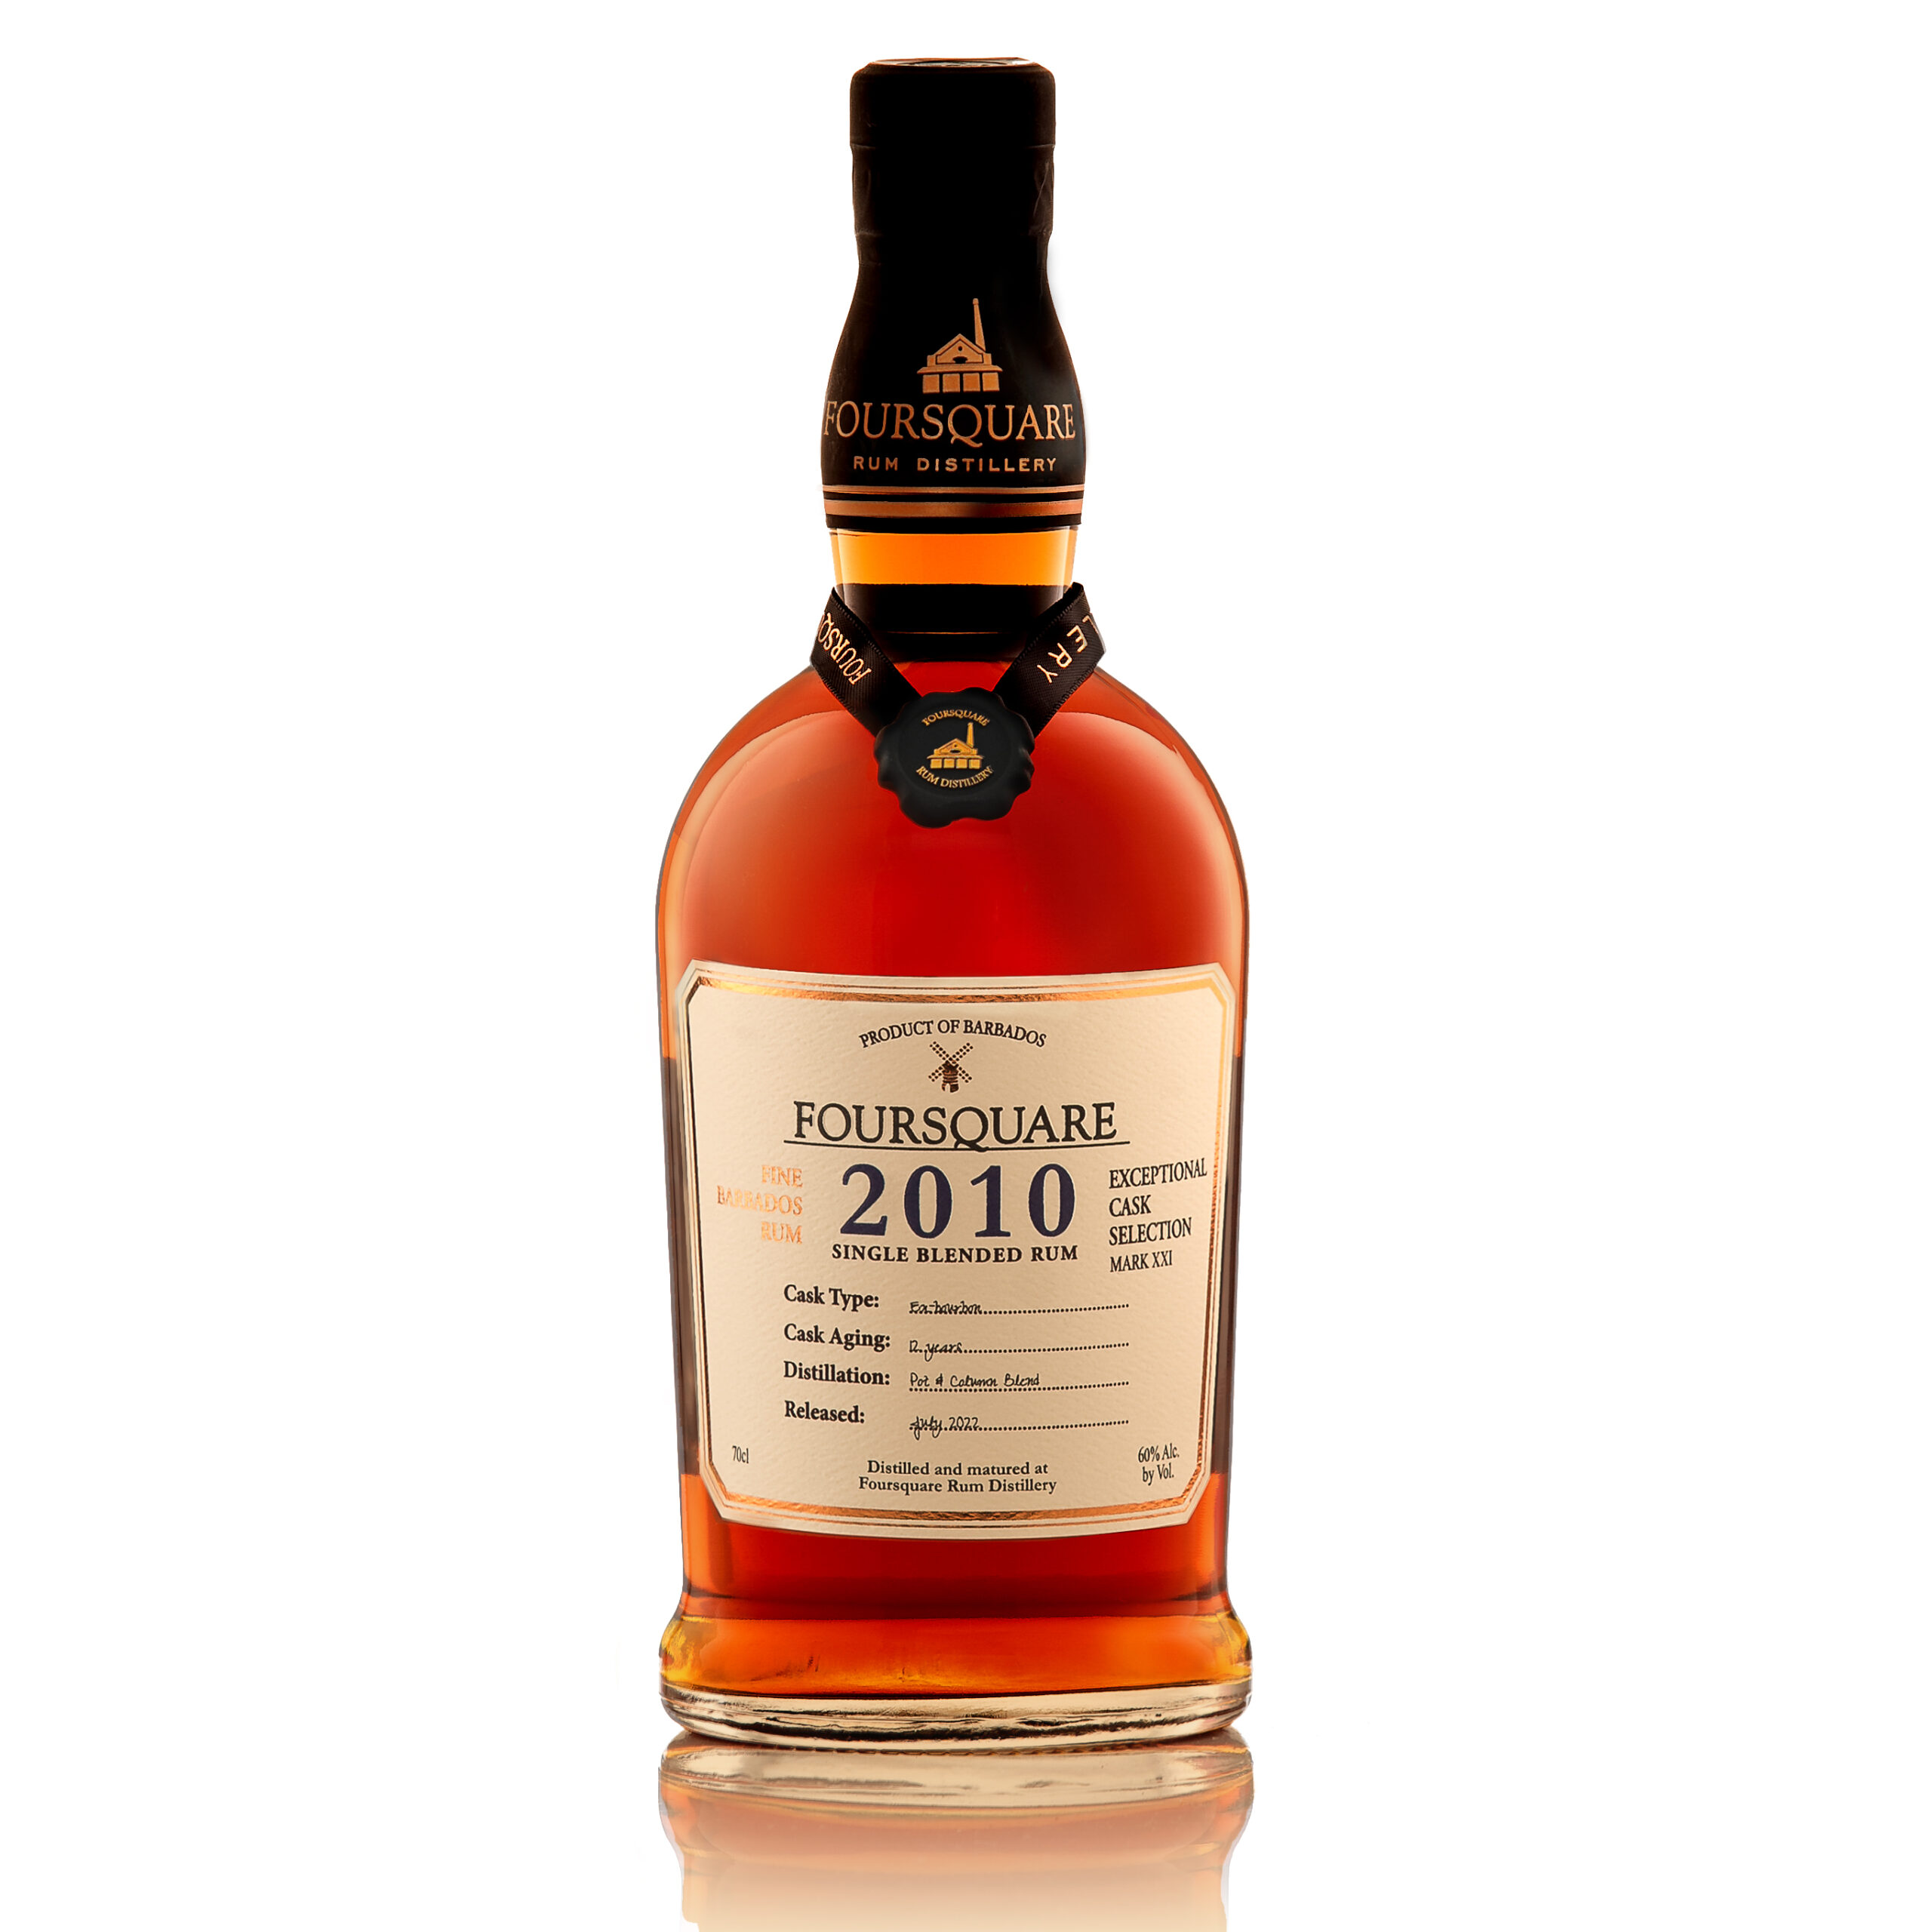 Foursquare Cask Strength 2010: Another Wonderful Rum!